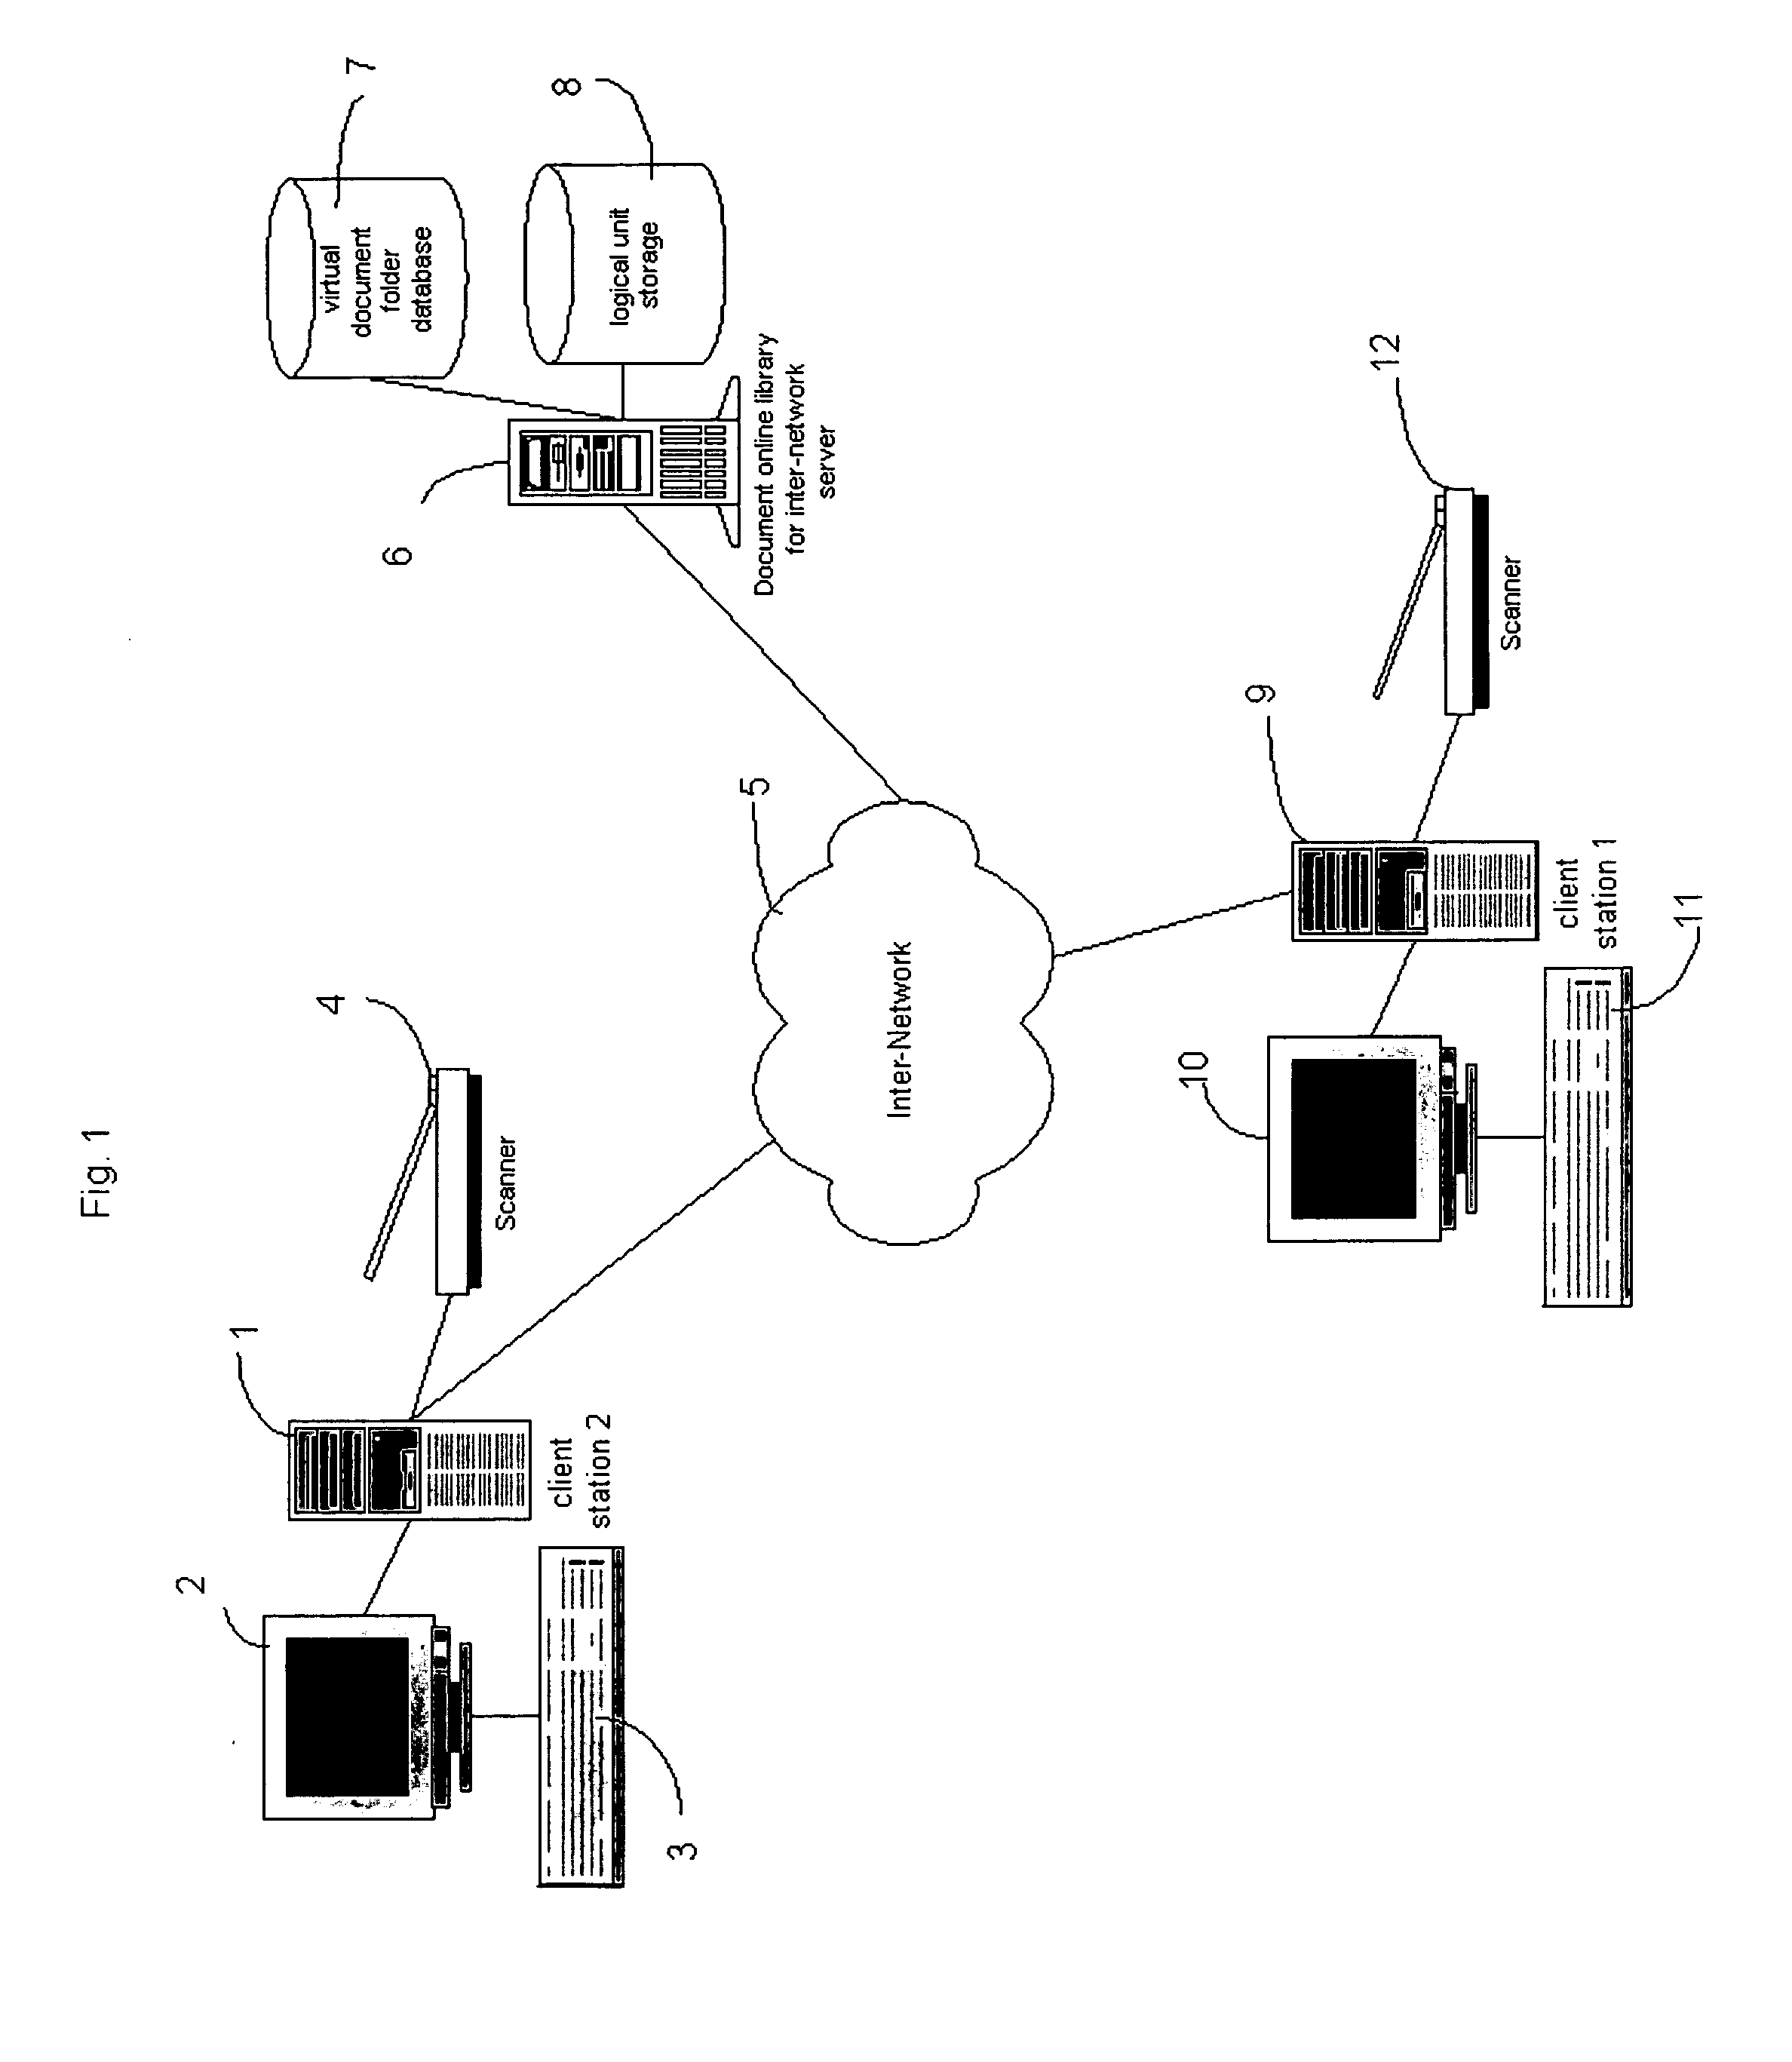 Electronic document management method and system